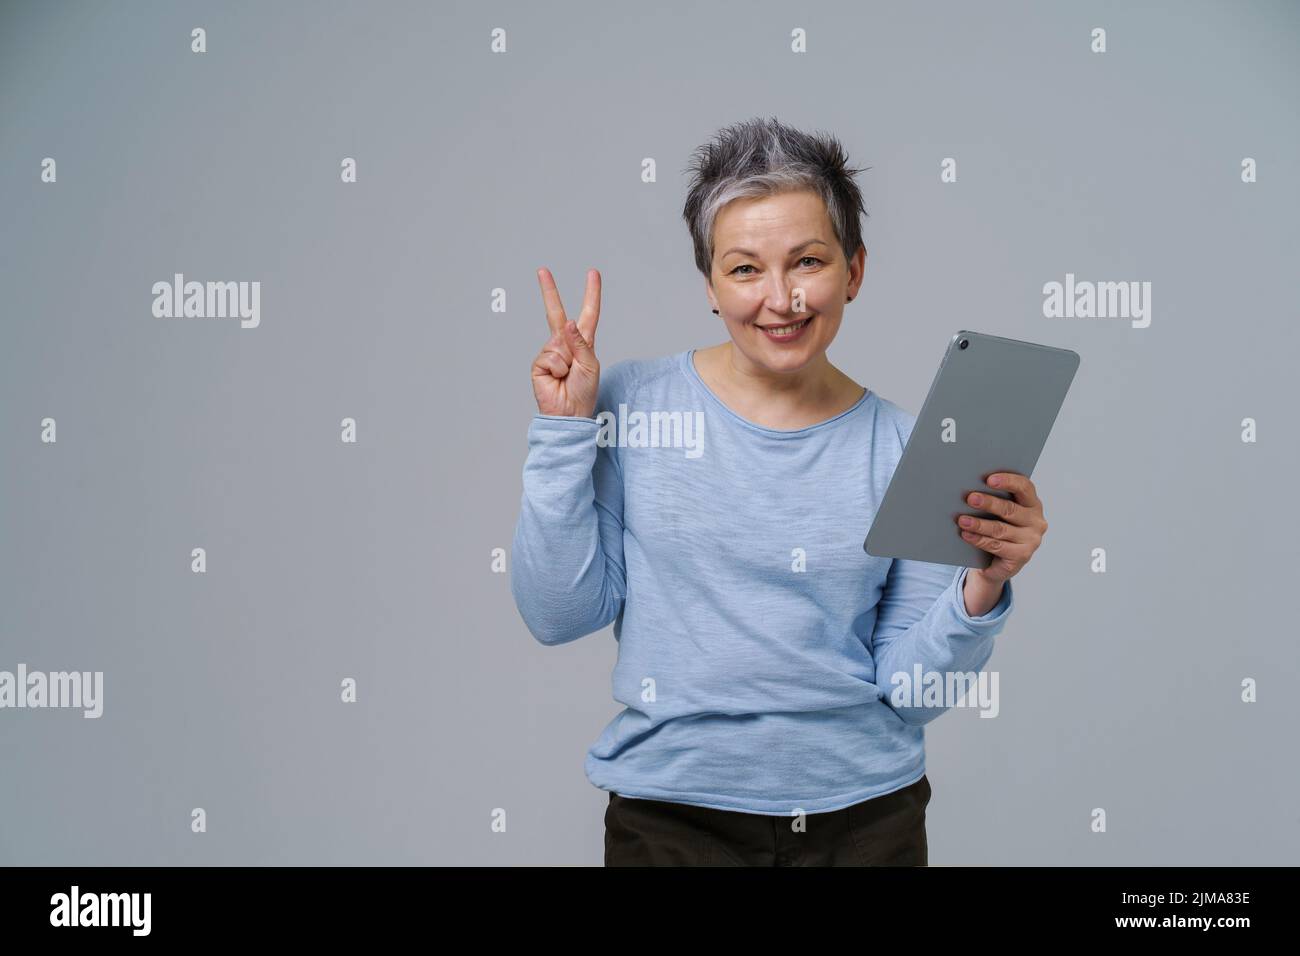 Gesturing V or victory mature grey haired woman in 50s holding digital tablet working or shopping online, checking on social media. Pretty woman in blue blouse isolated on white background. Stock Photo